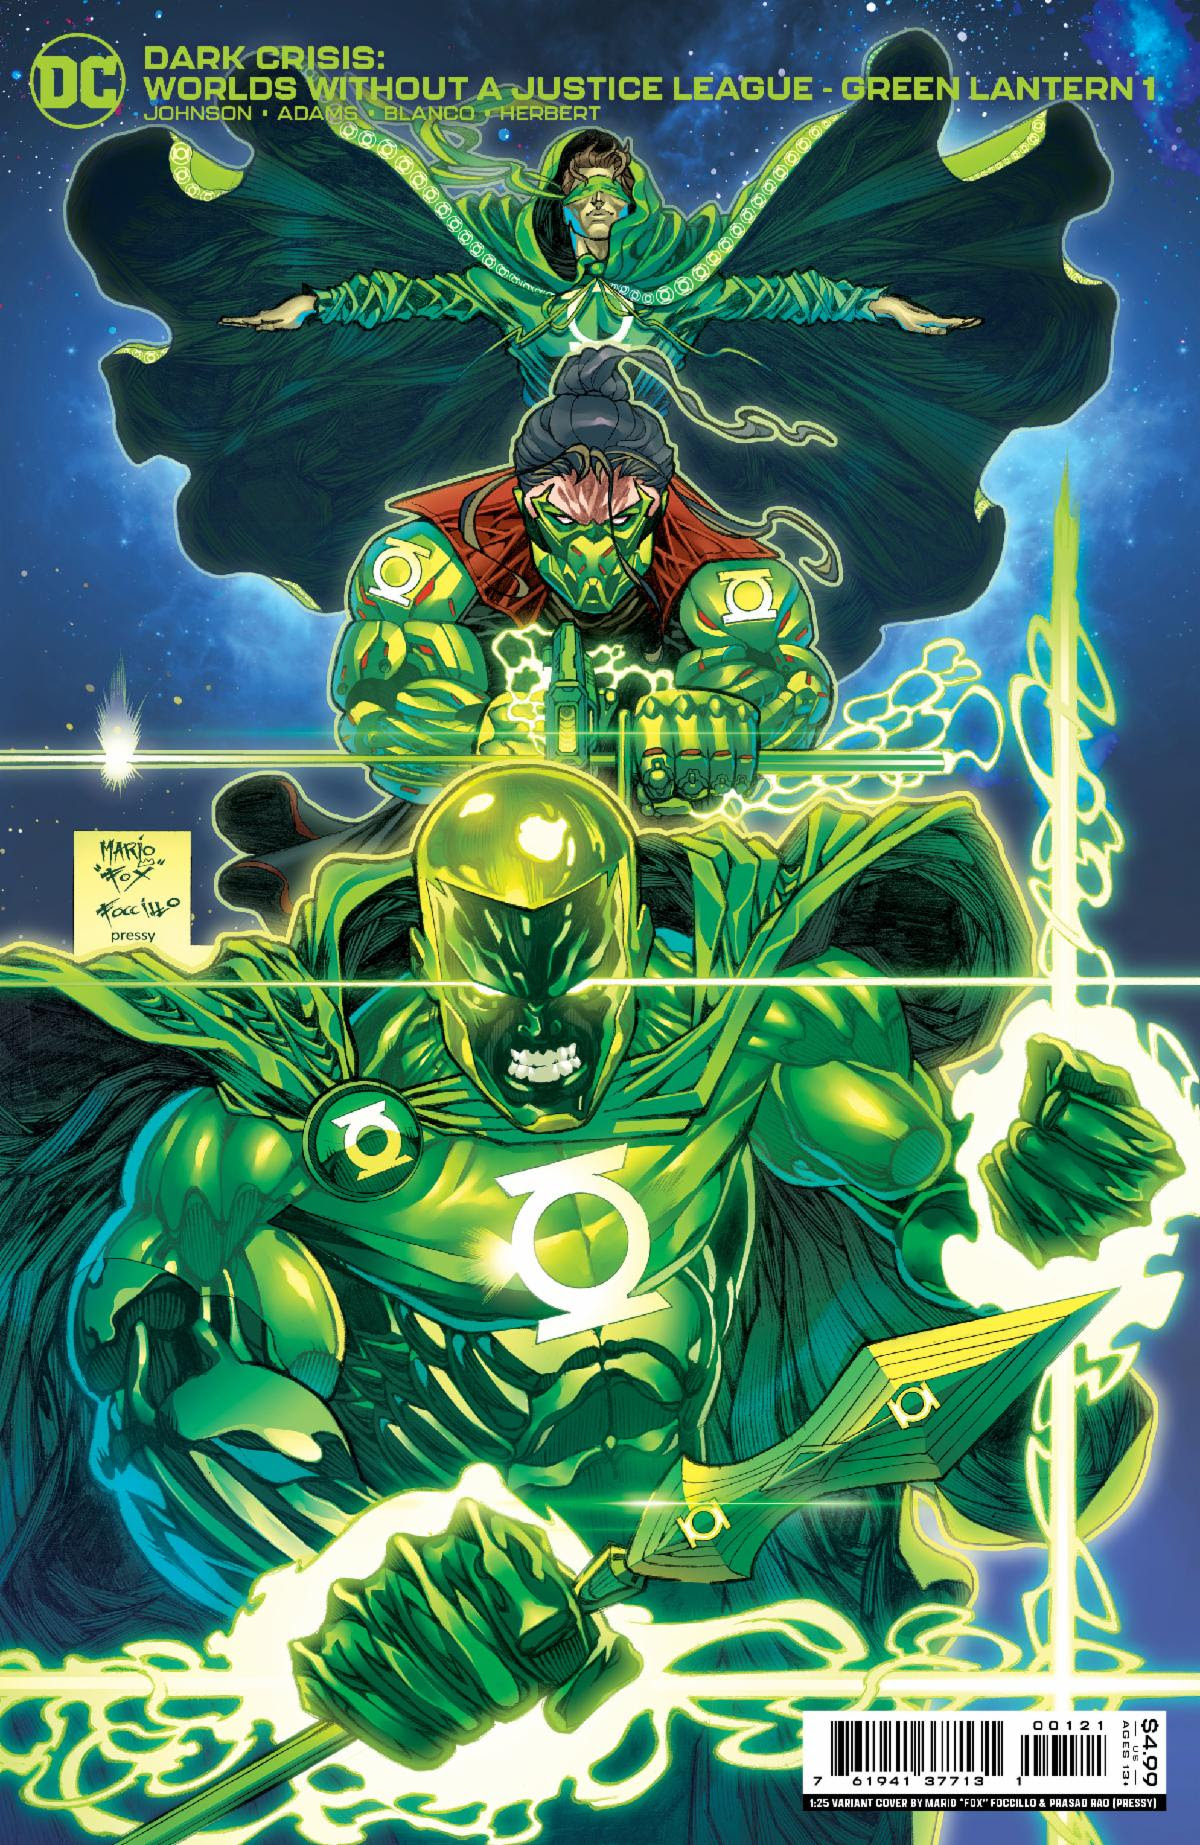 Dark Crisis Worlds Without A Justice League Green Lantern #1 (One Shot) Cover B 1 for 25 Incentive Variant Mario Focci